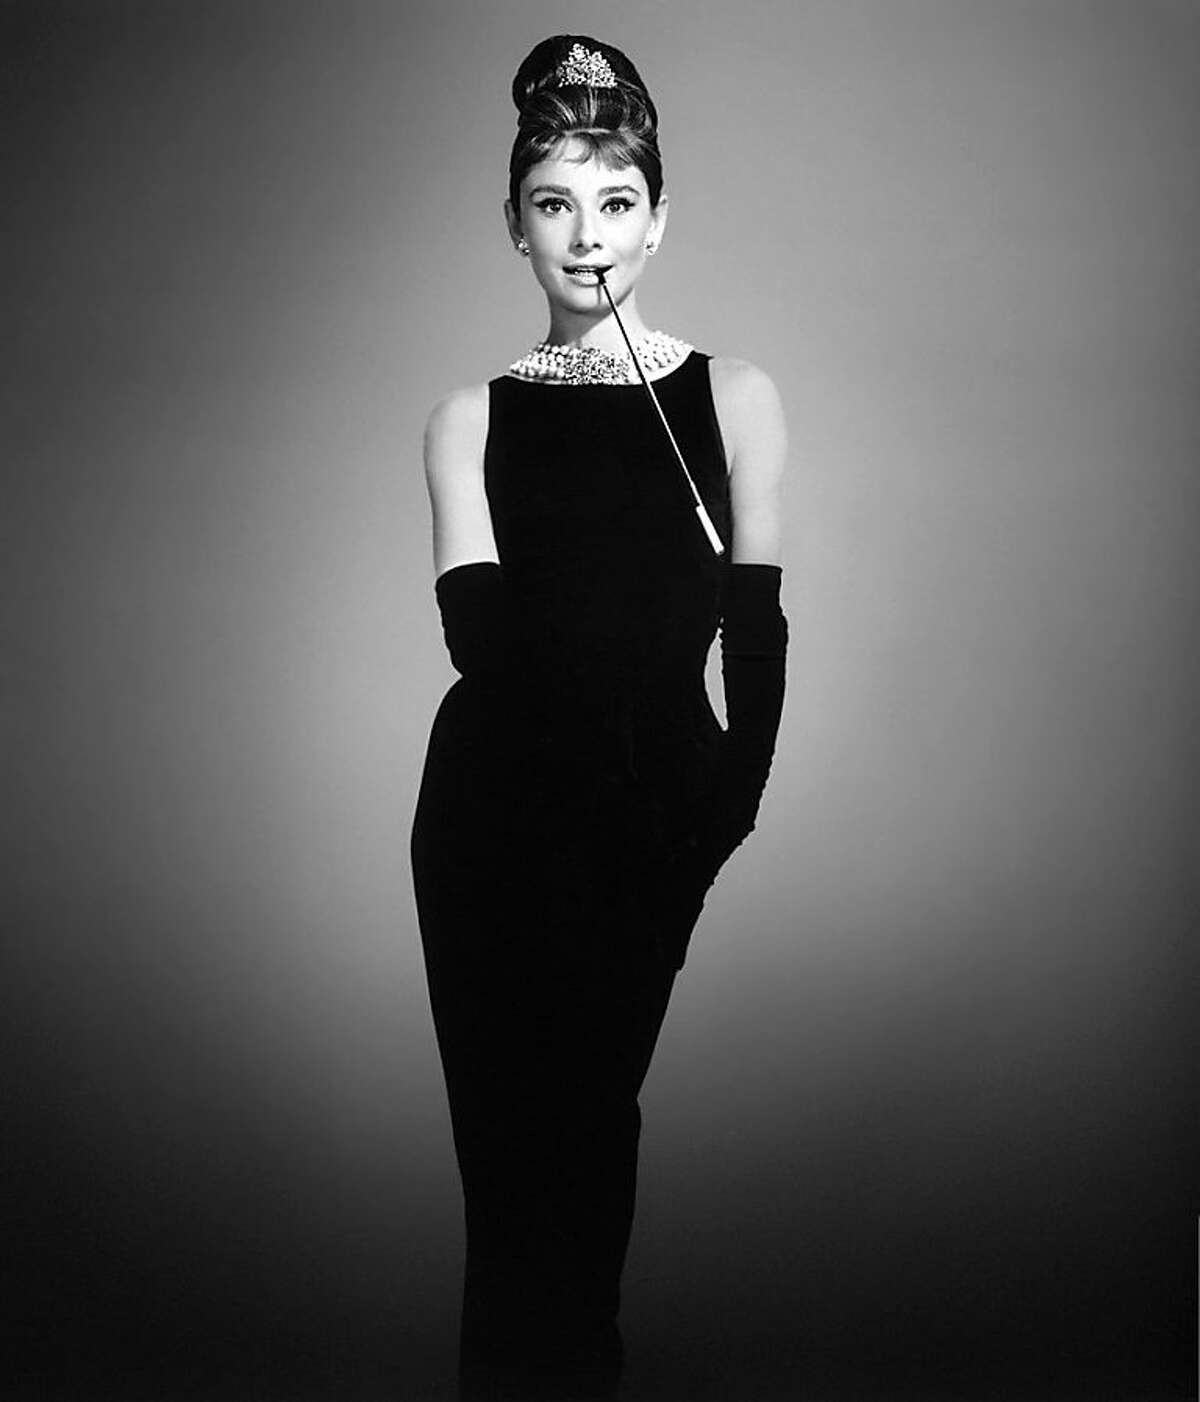 Audrey Hepburn fashionable as ever in DVD set